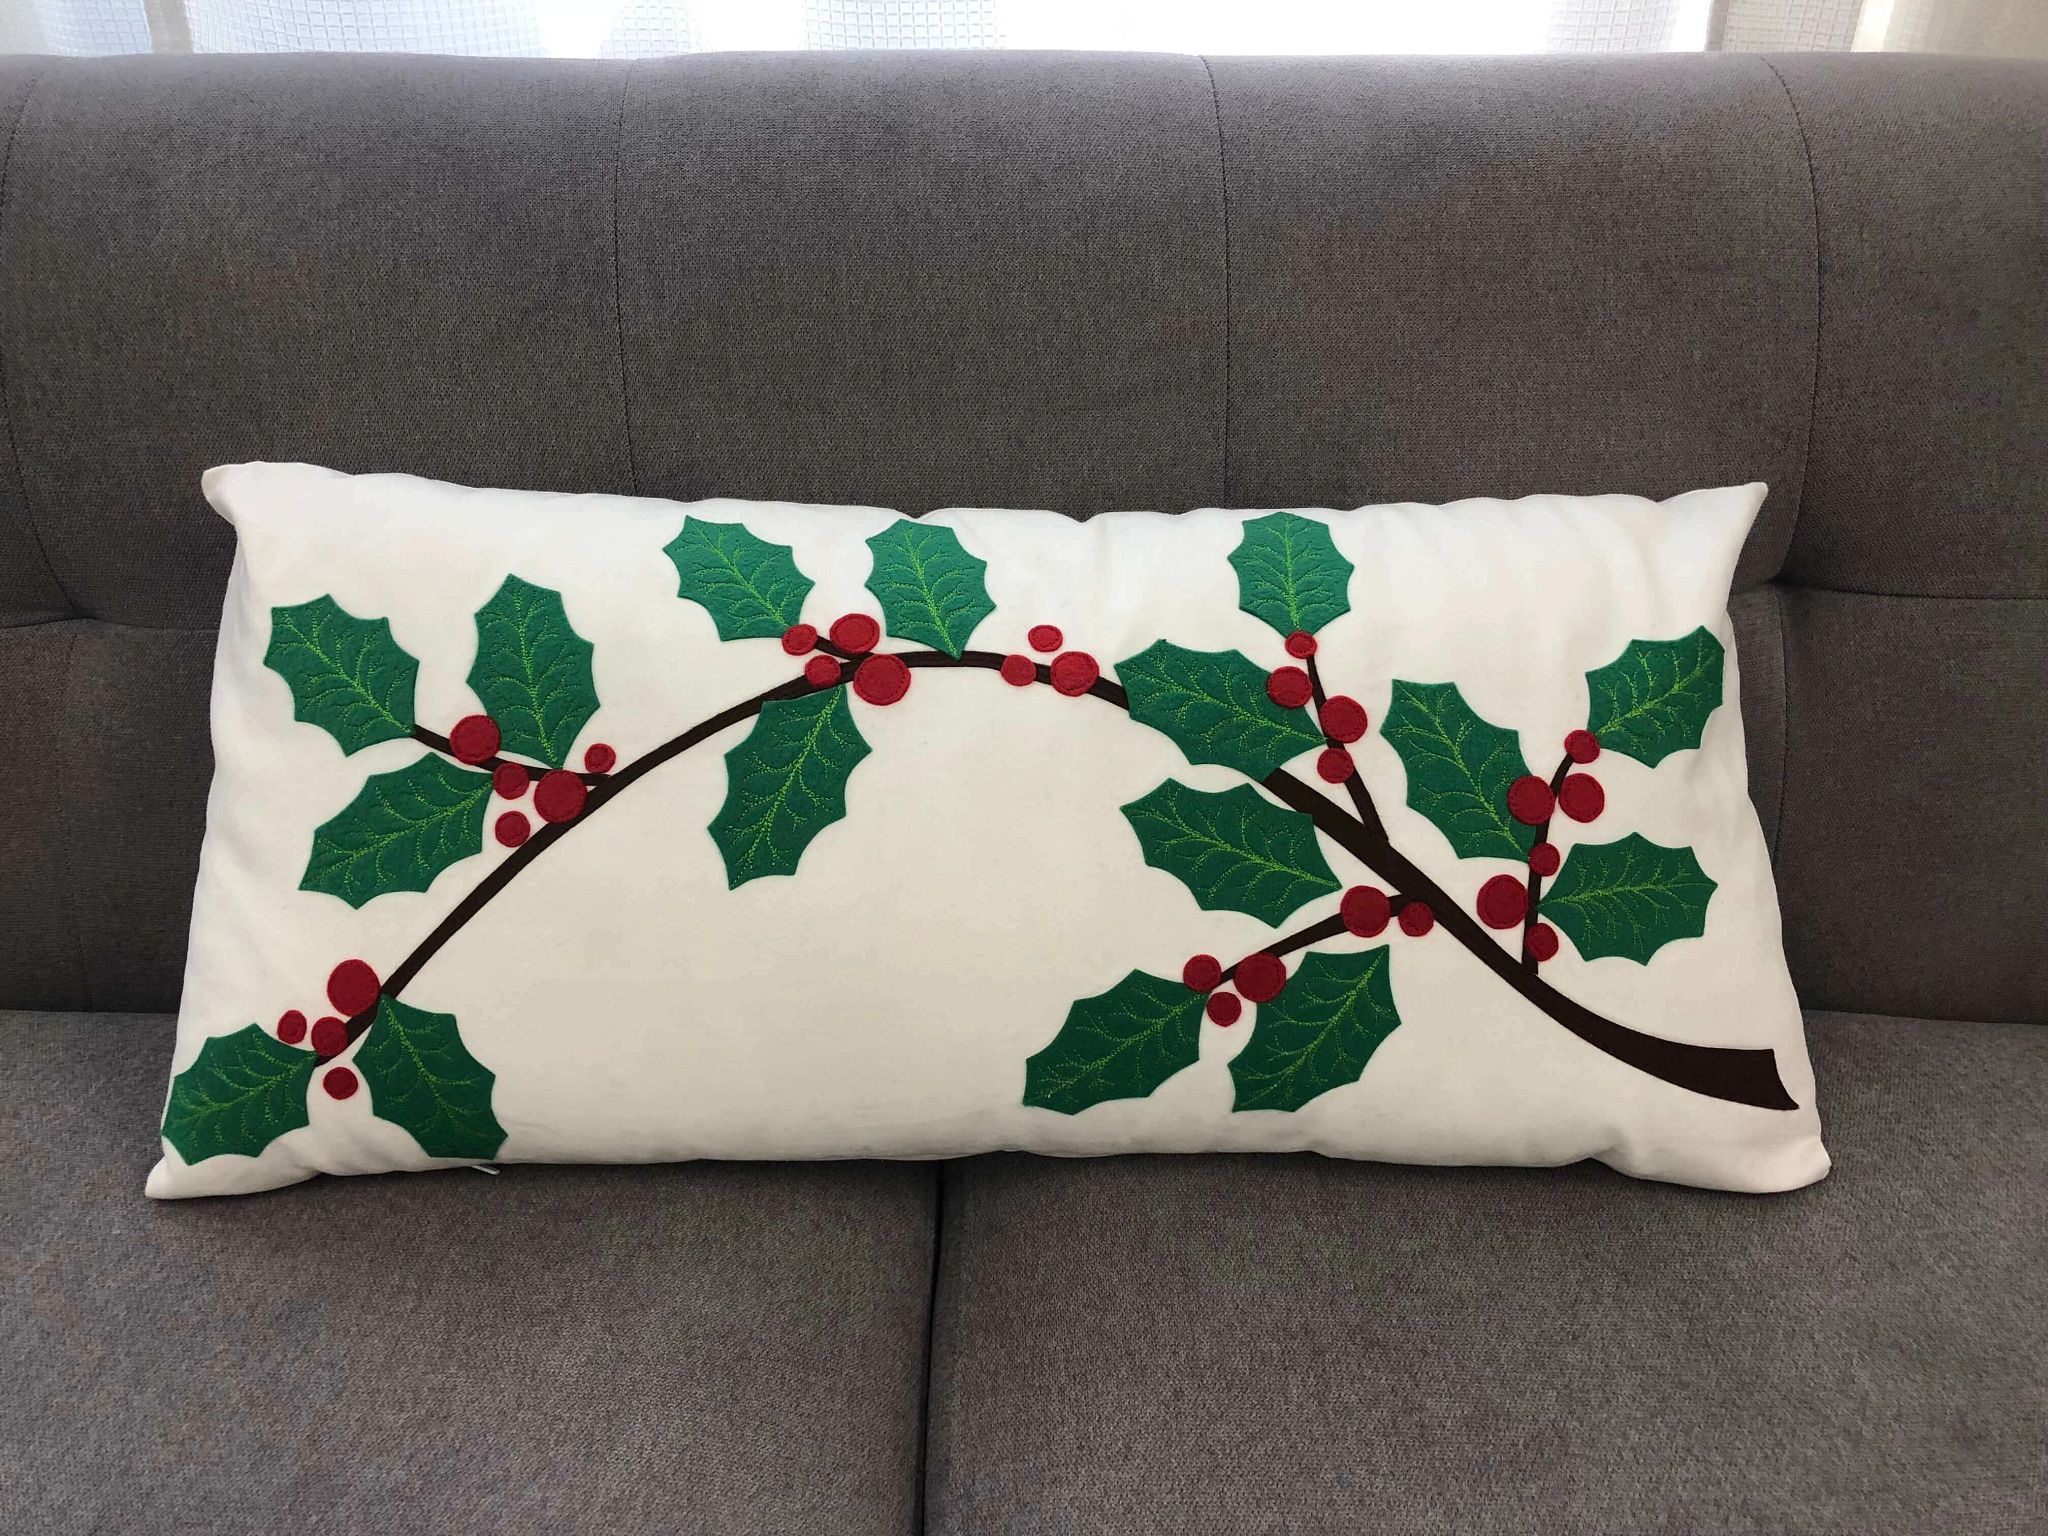 Decorative Pillow with Holly Applique Embellishment